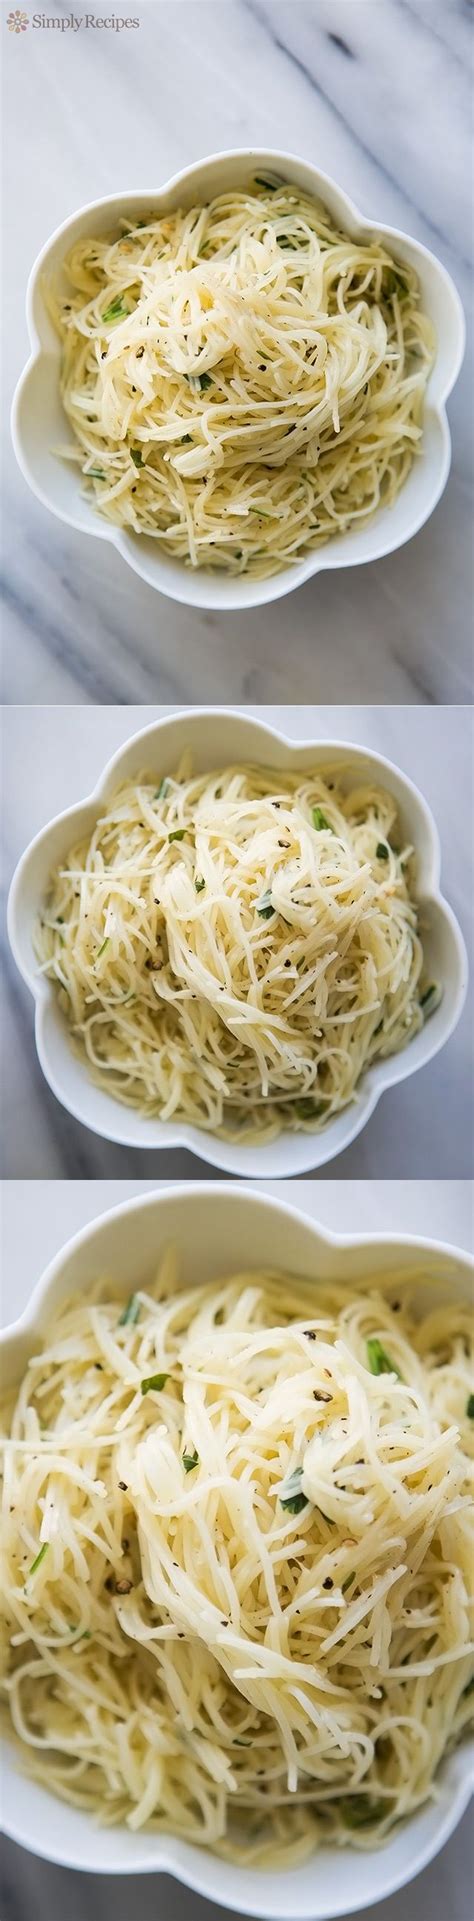 Simple angel hair pasta side, with olive oil, garlic, herbs and parmesan angel hair pasta with garlic herbs and parmesan